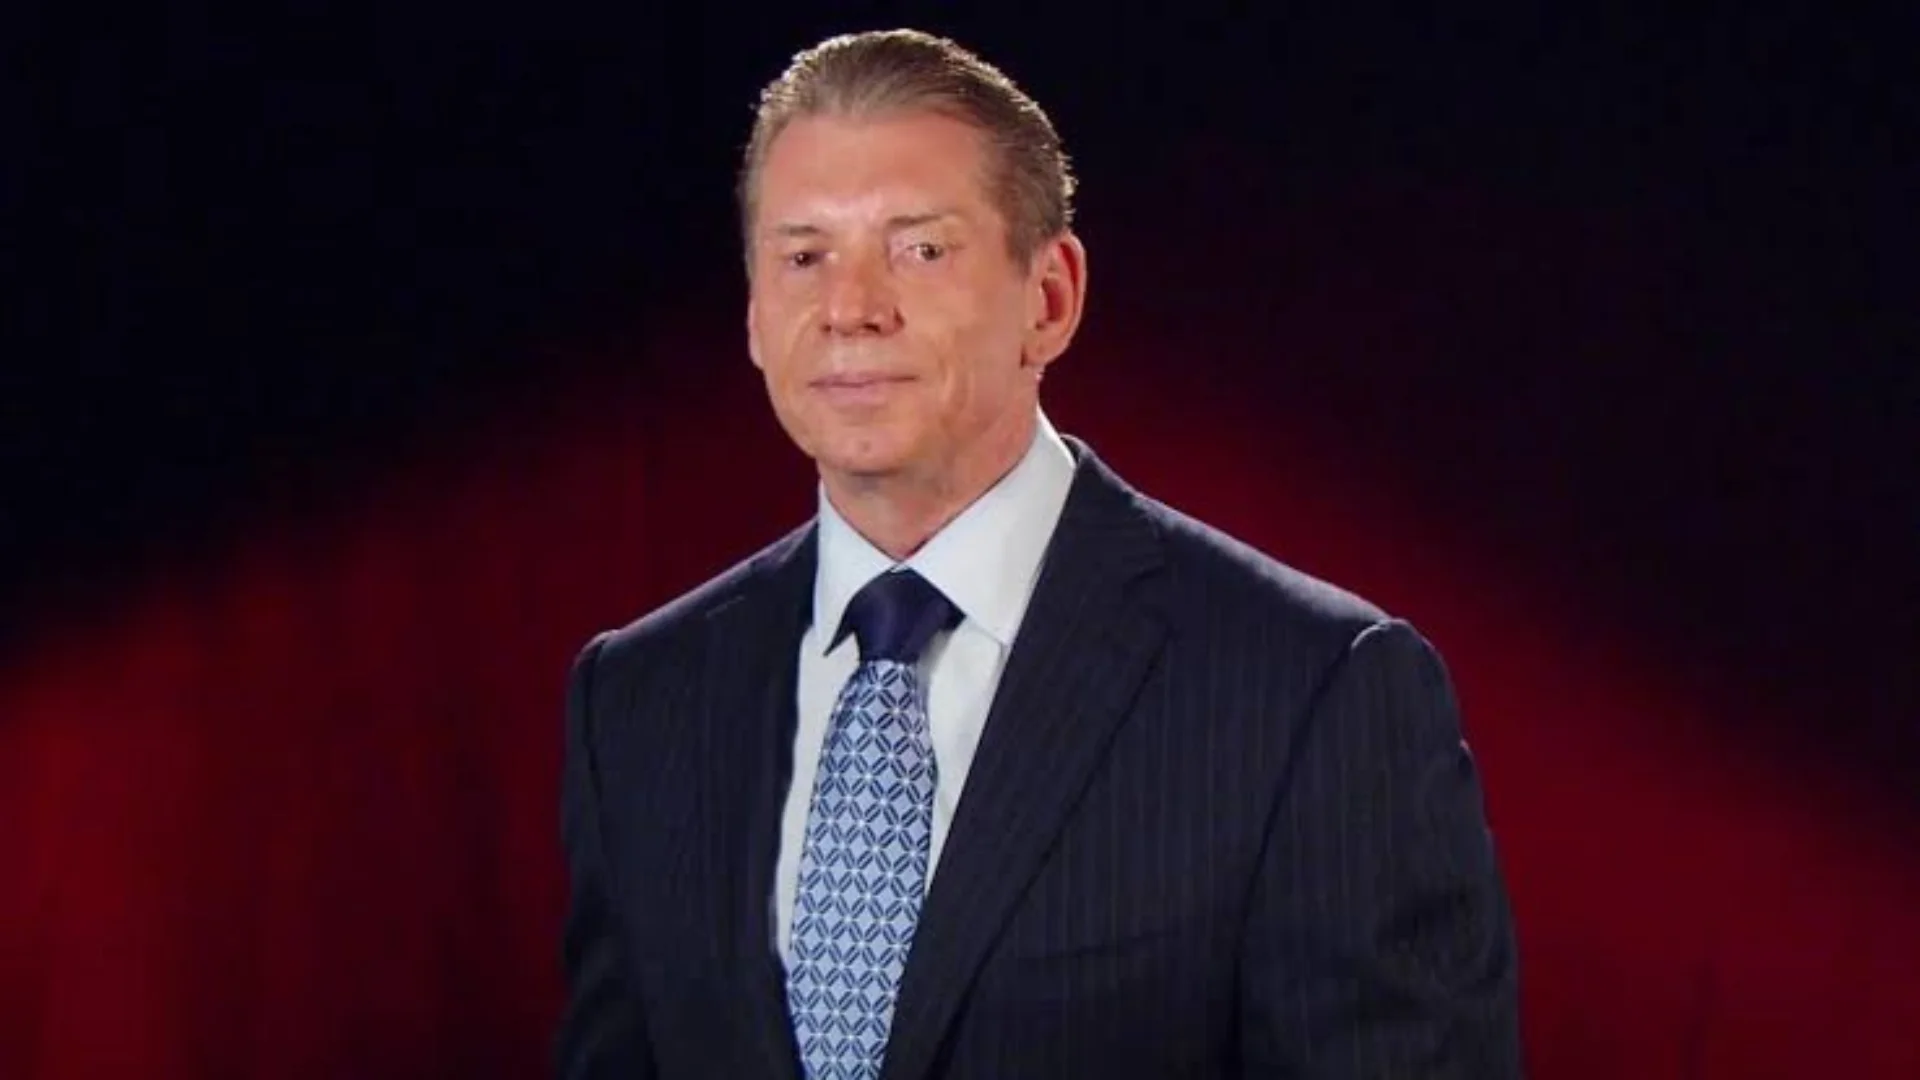 Vince McMahon- the head of World Wrestling Entertainment (WWE) resigned